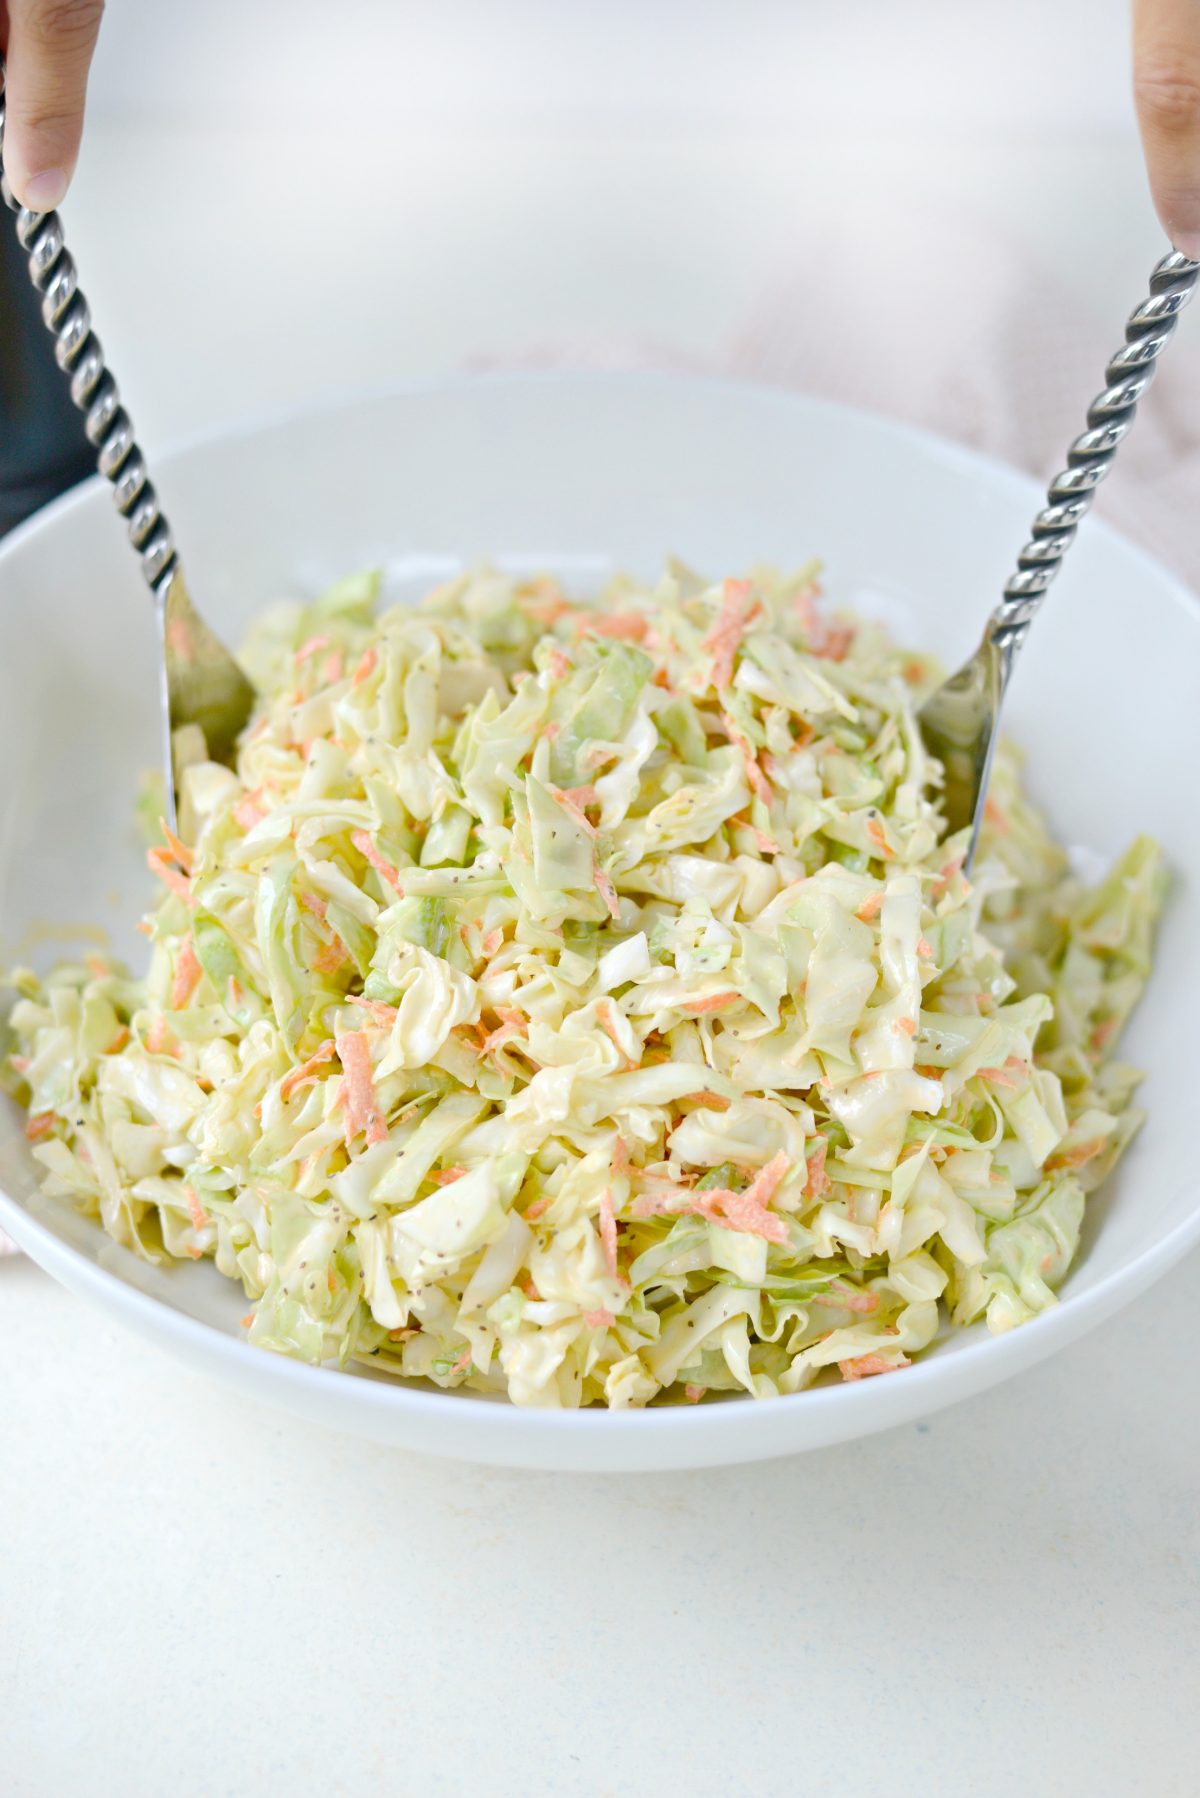 Simply Scratch Classic Coleslaw Recipe with Homemade Dressing - Simply ...